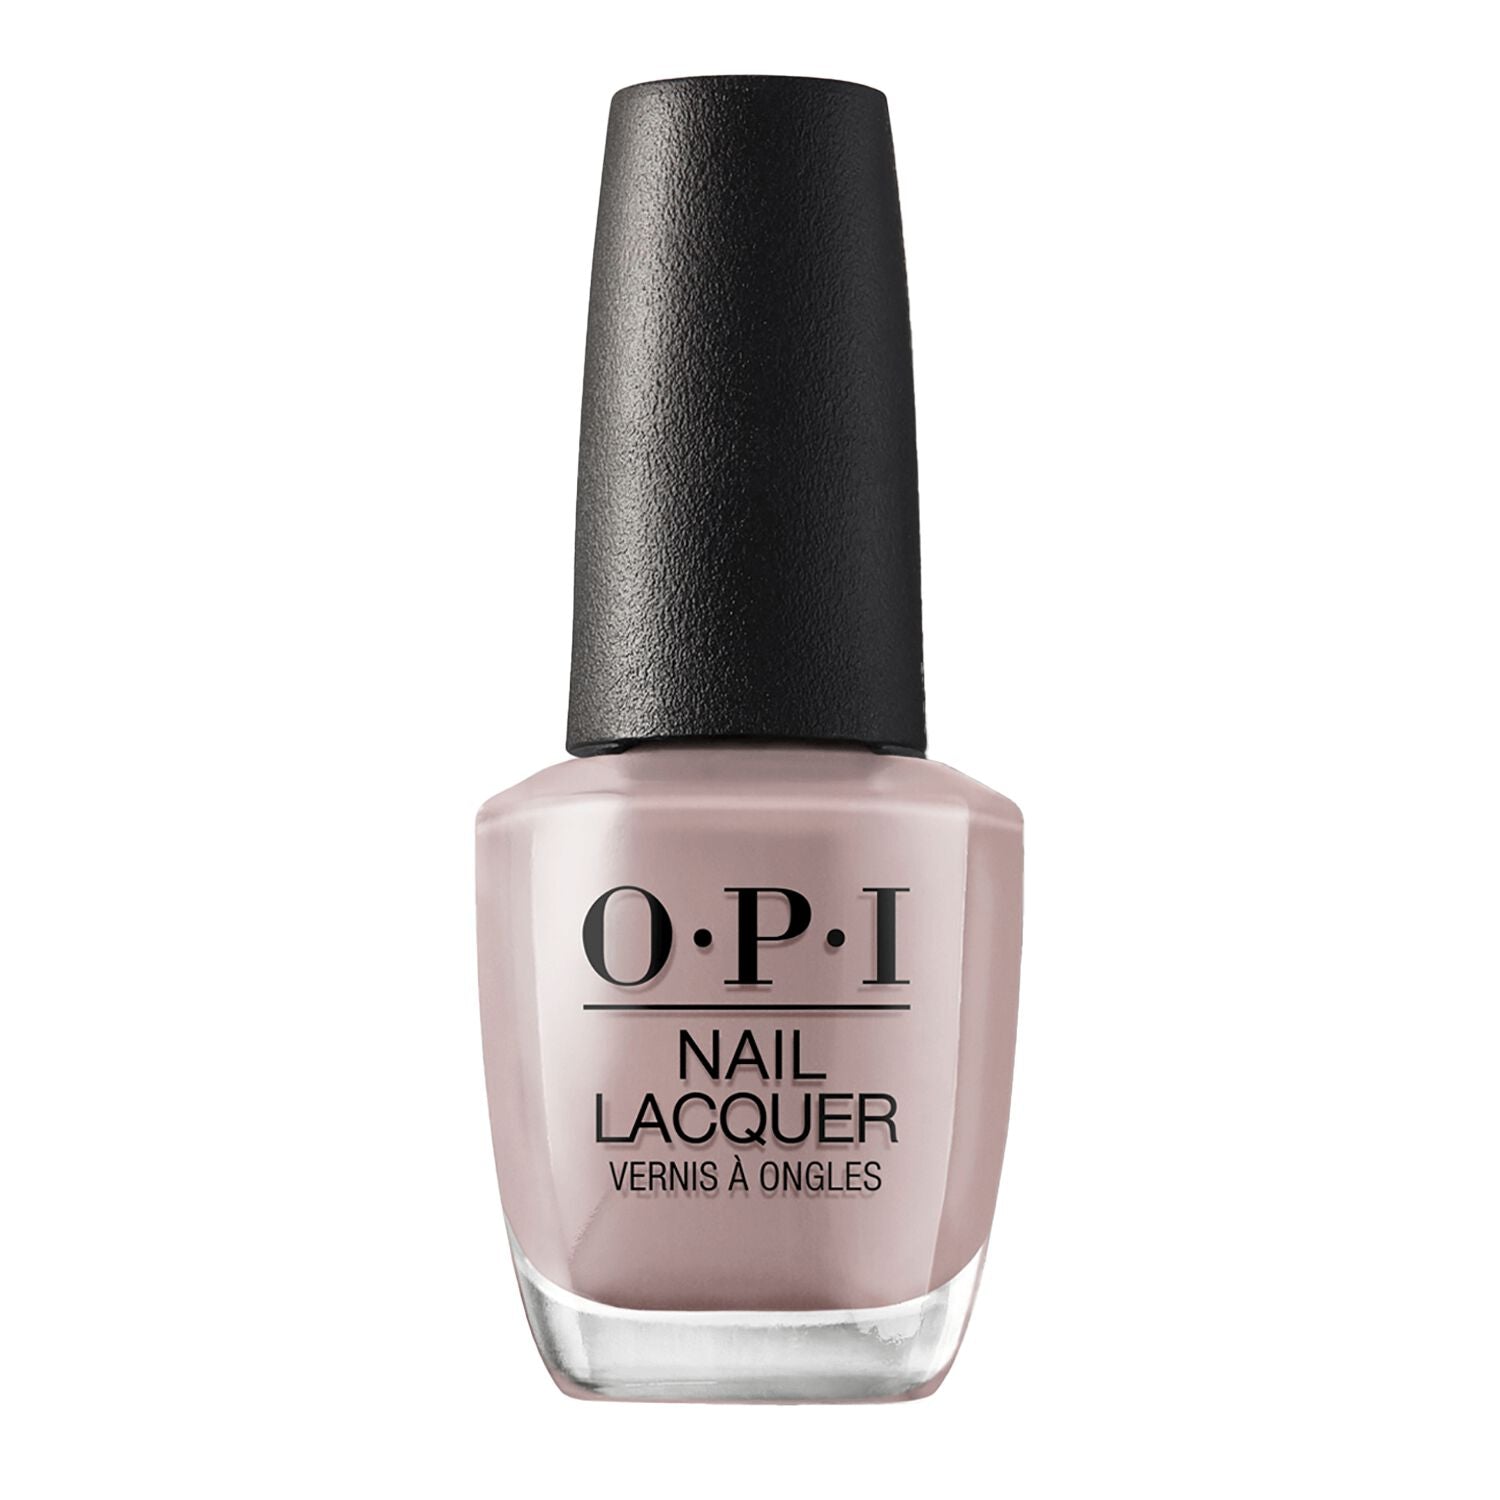 OPI Berlin There Done That Nail Lacquer